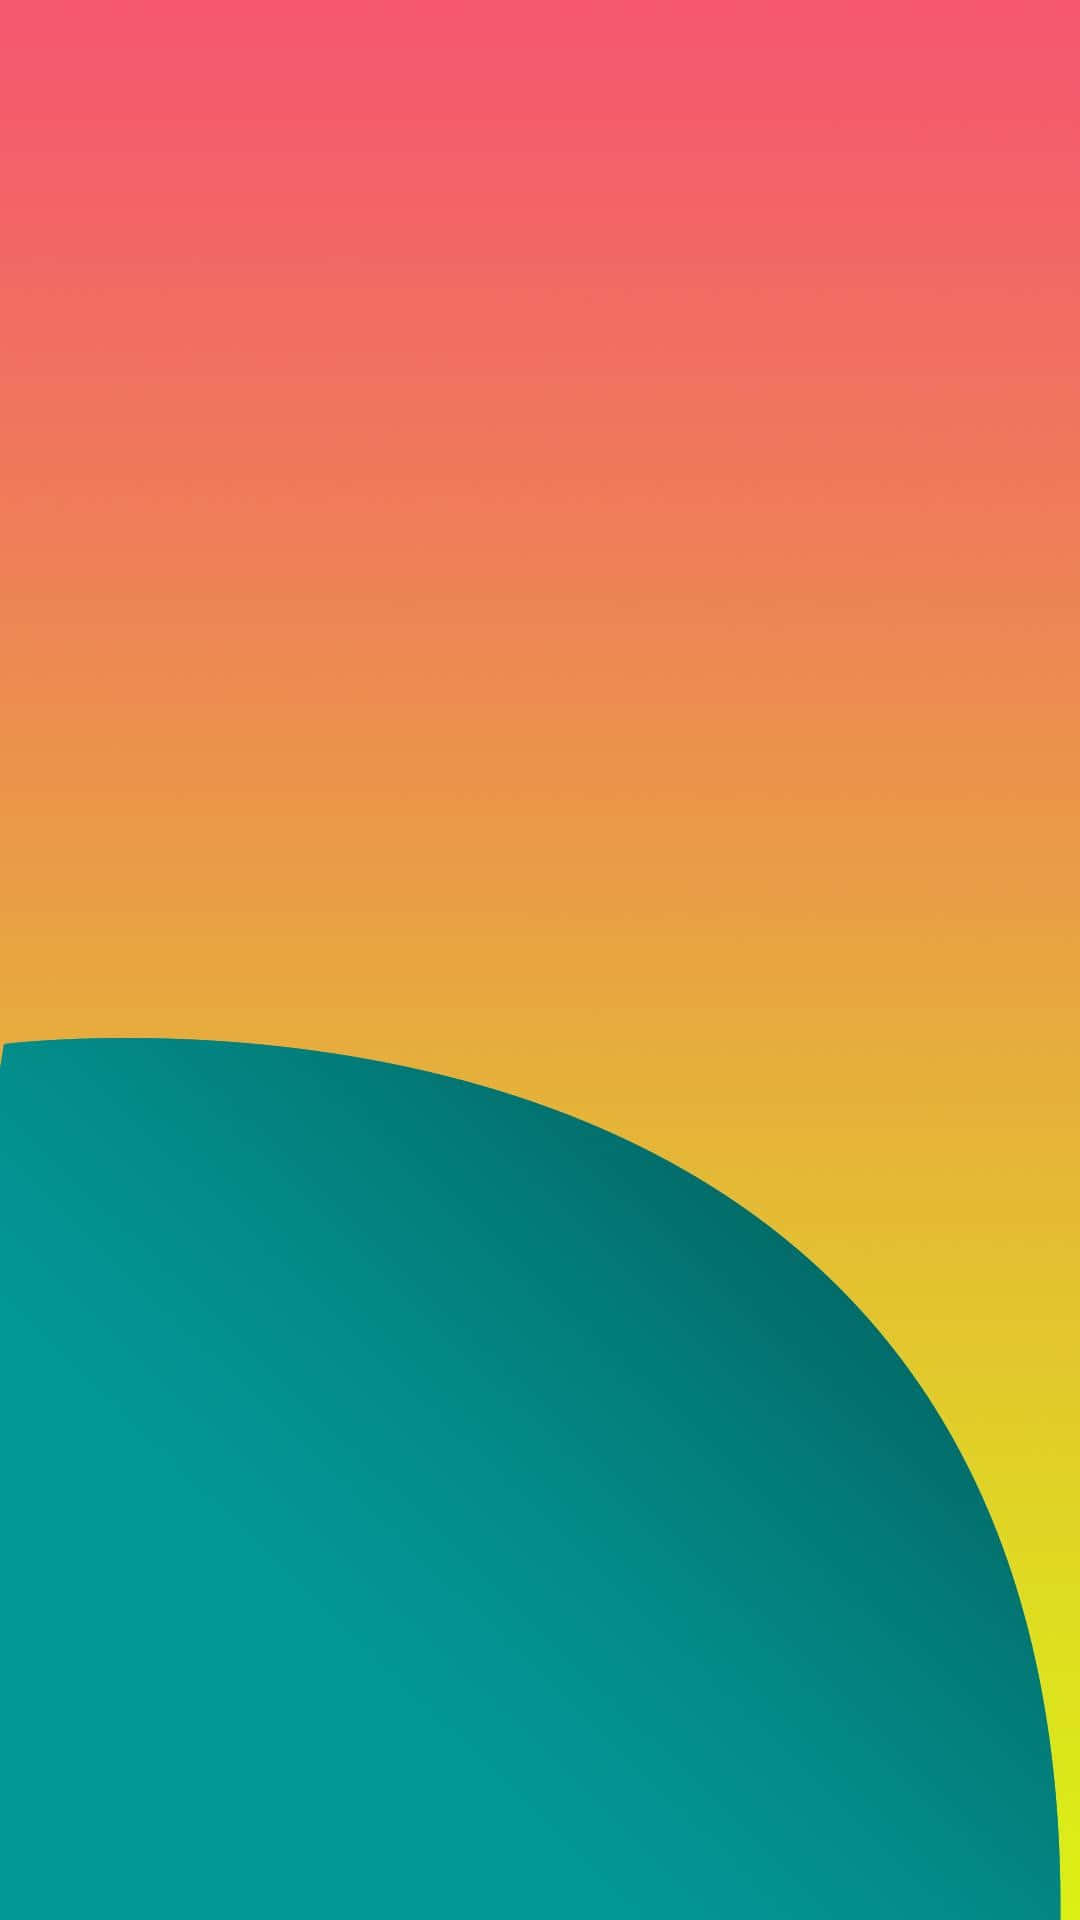 Get the cutting-edge of mobile phone technology with the Nexus 5 Wallpaper